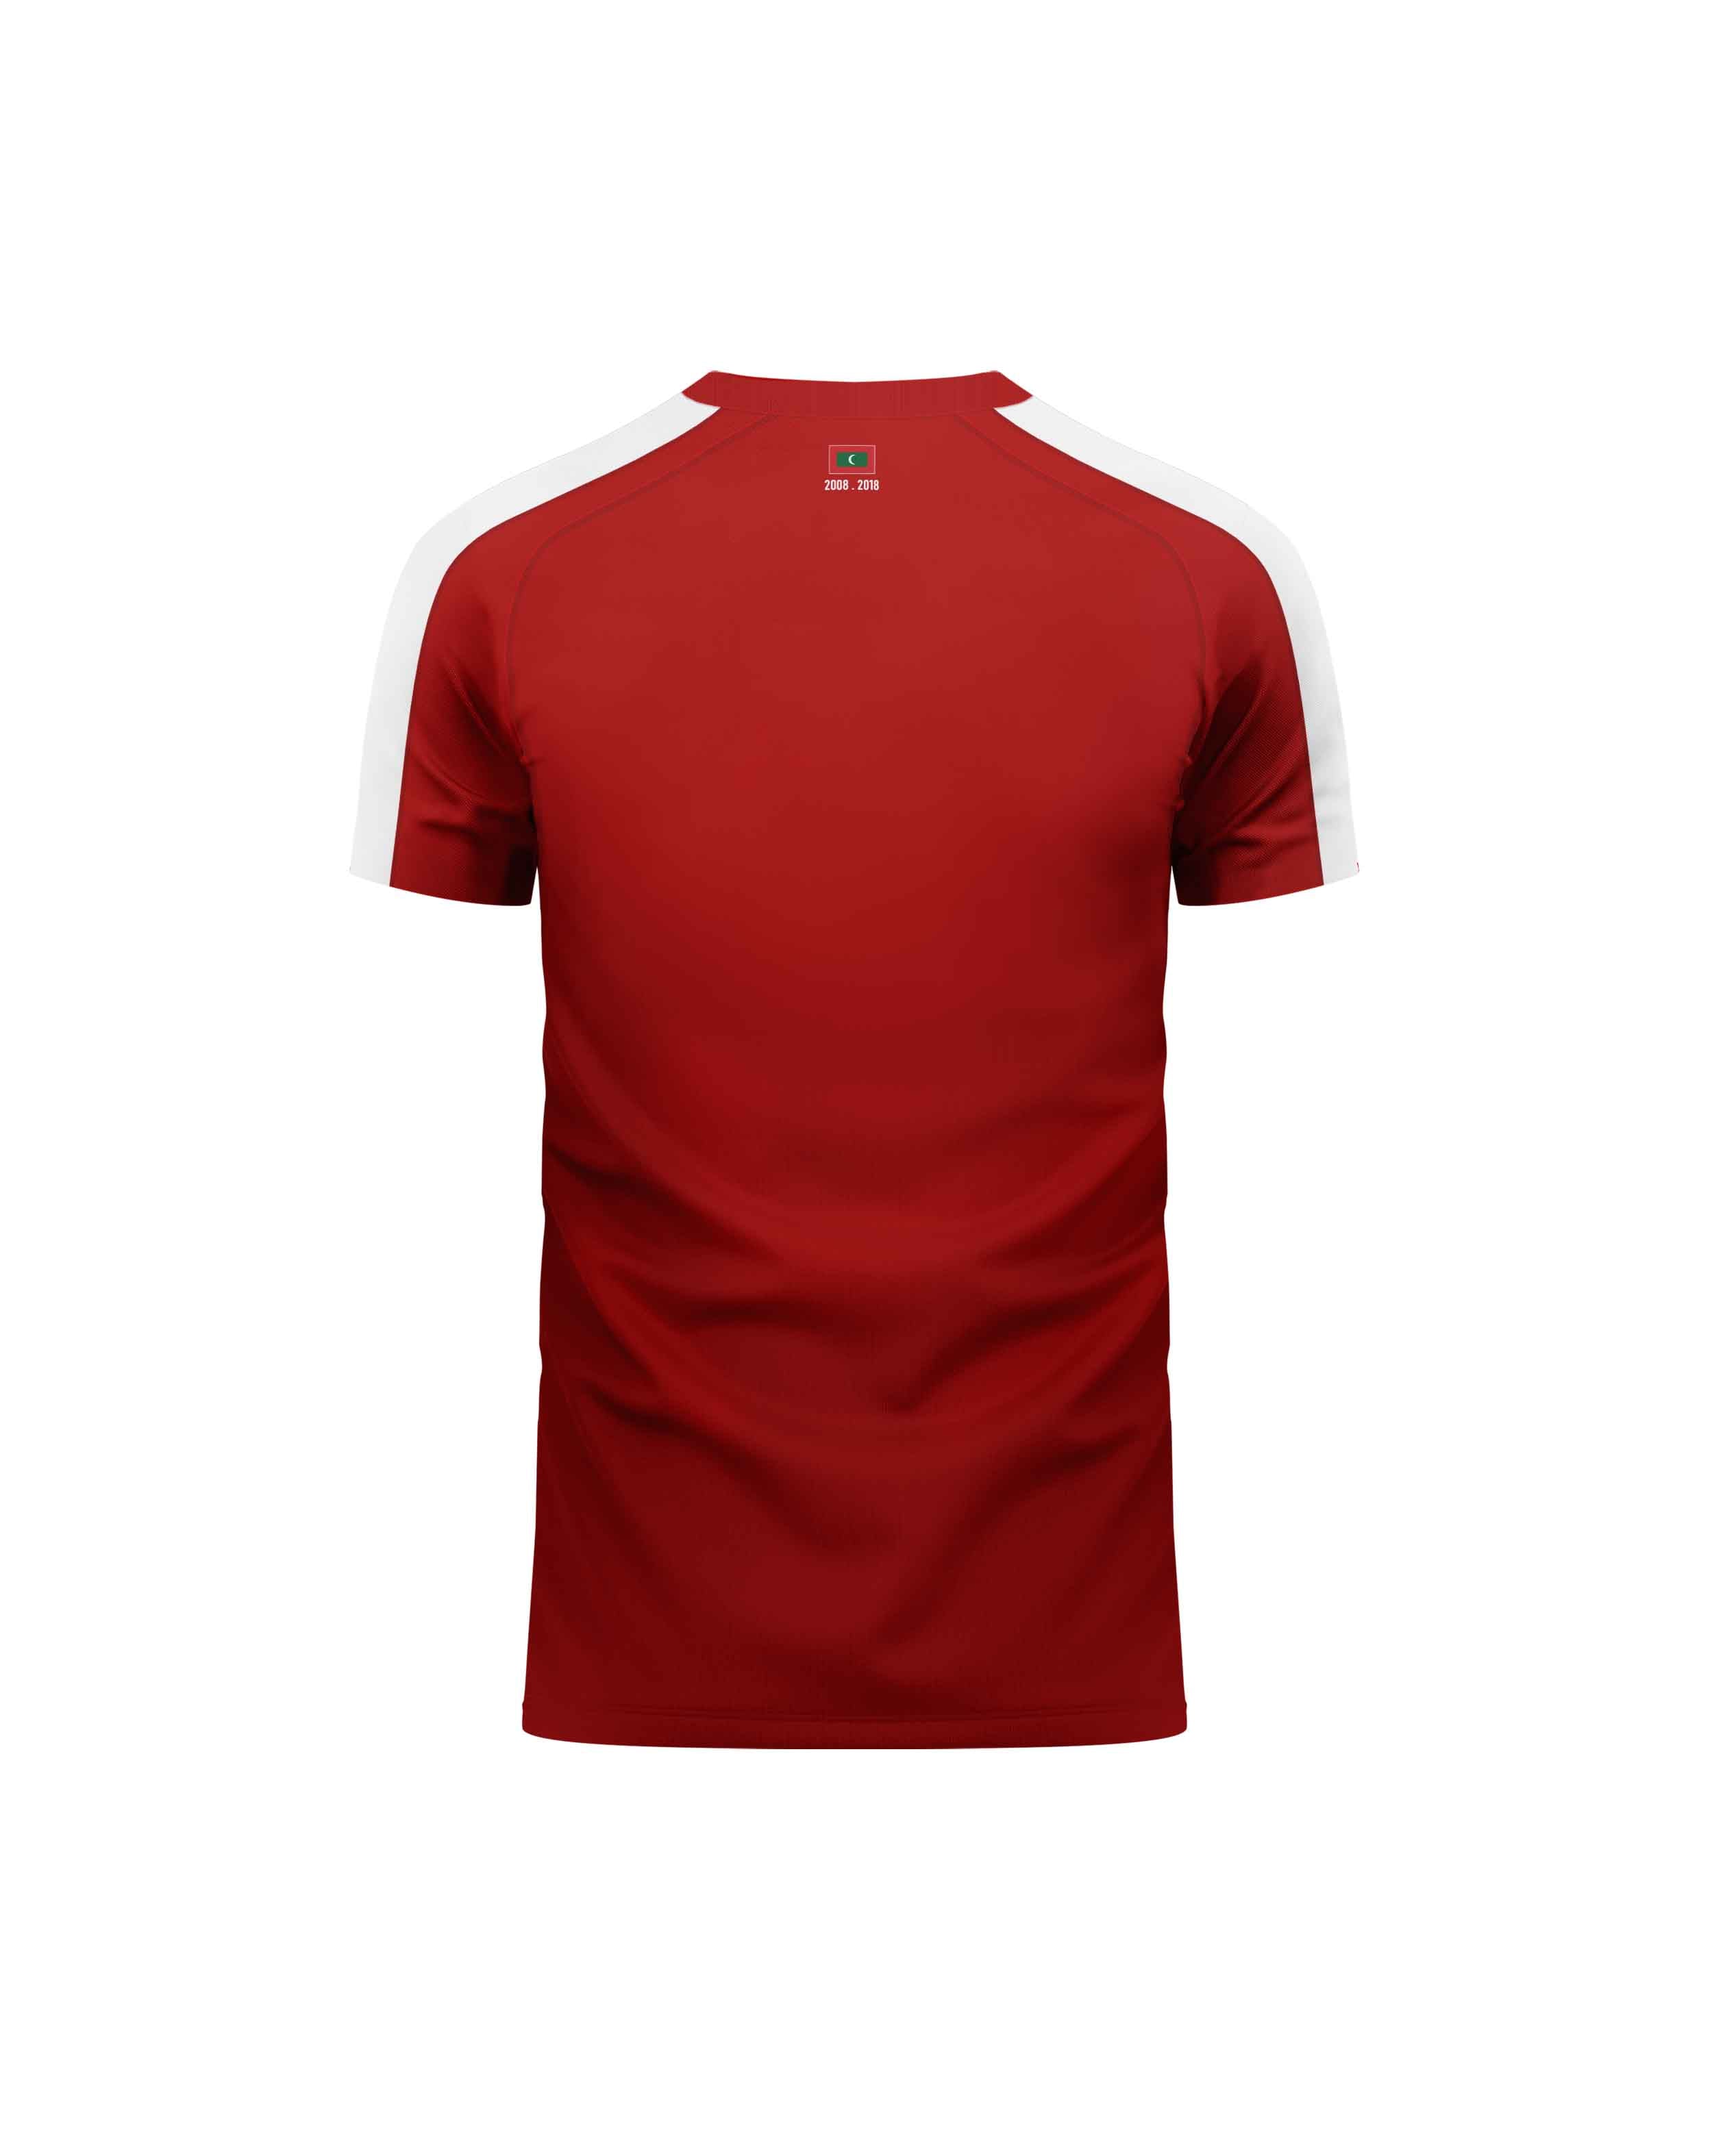 Maldives National Team Supporters Jersey SS